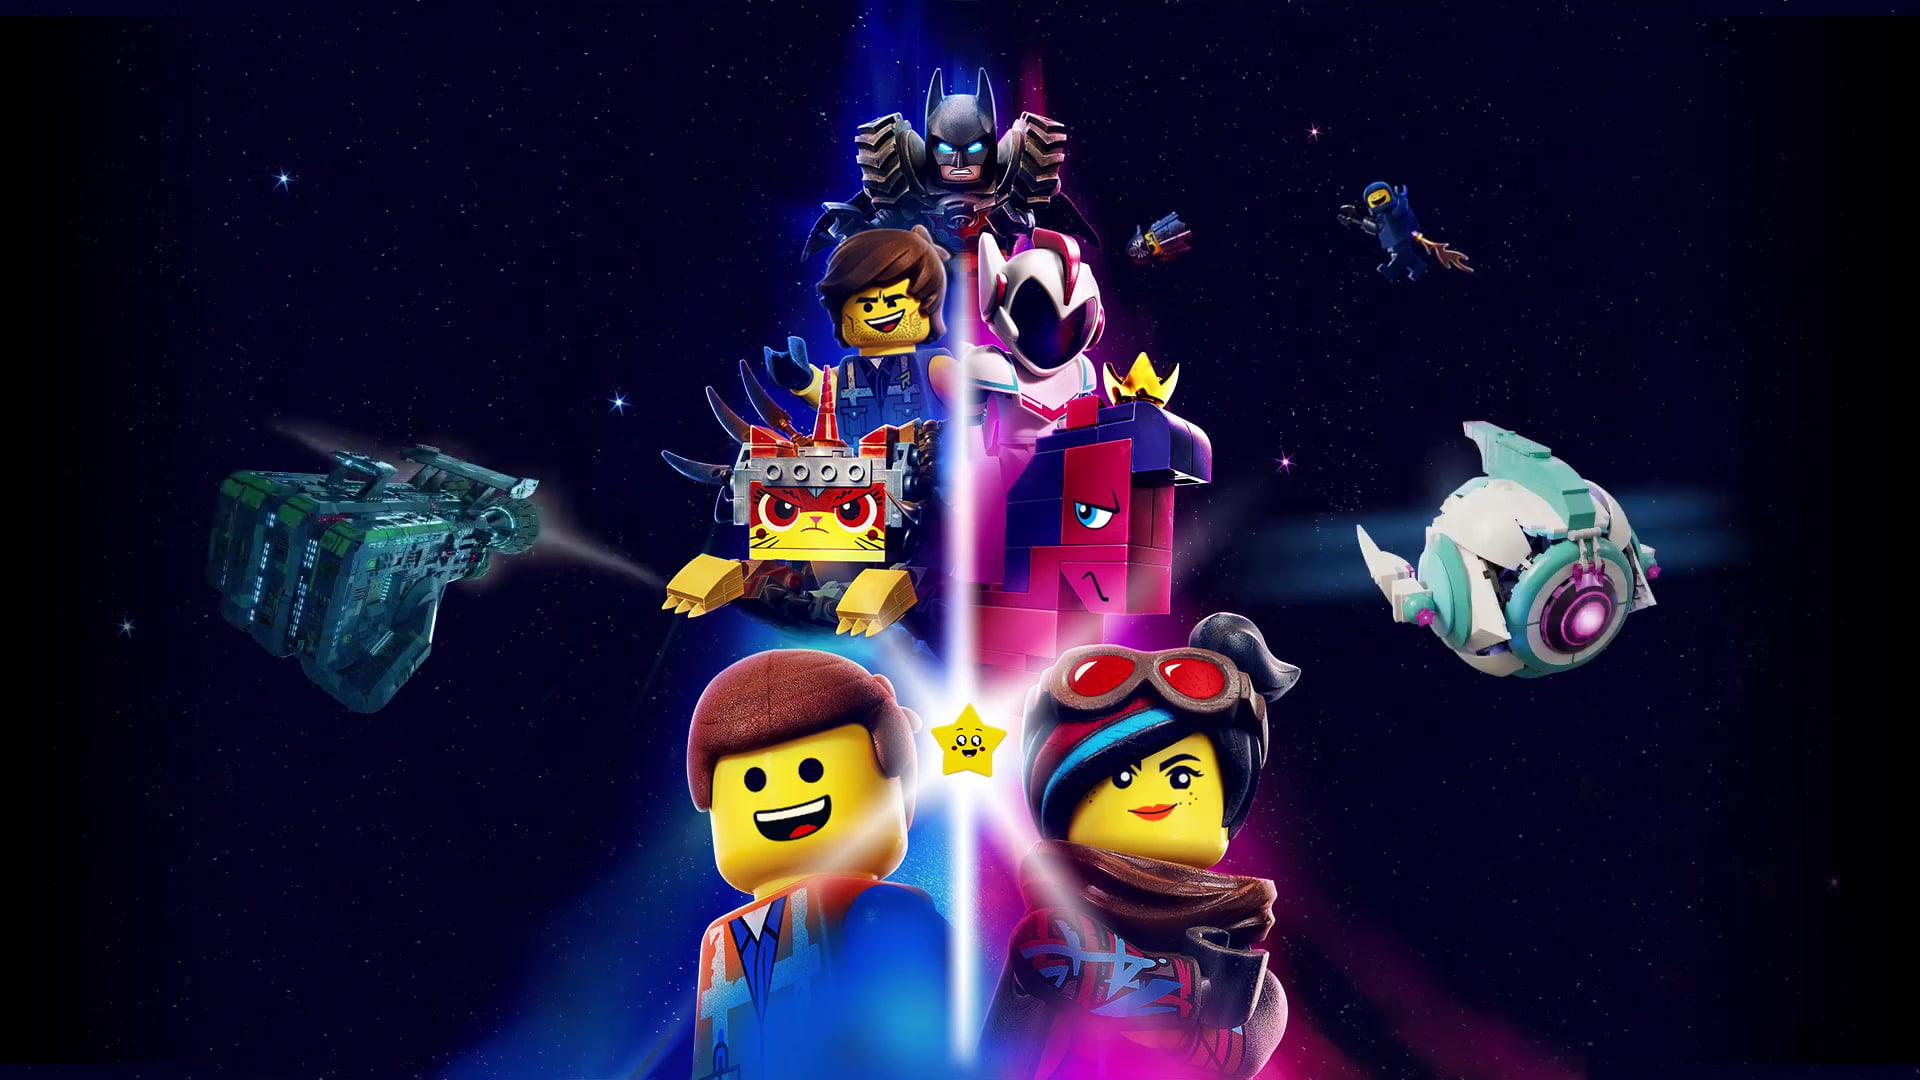 Watch the lego movie 2 full movie online free 123movies